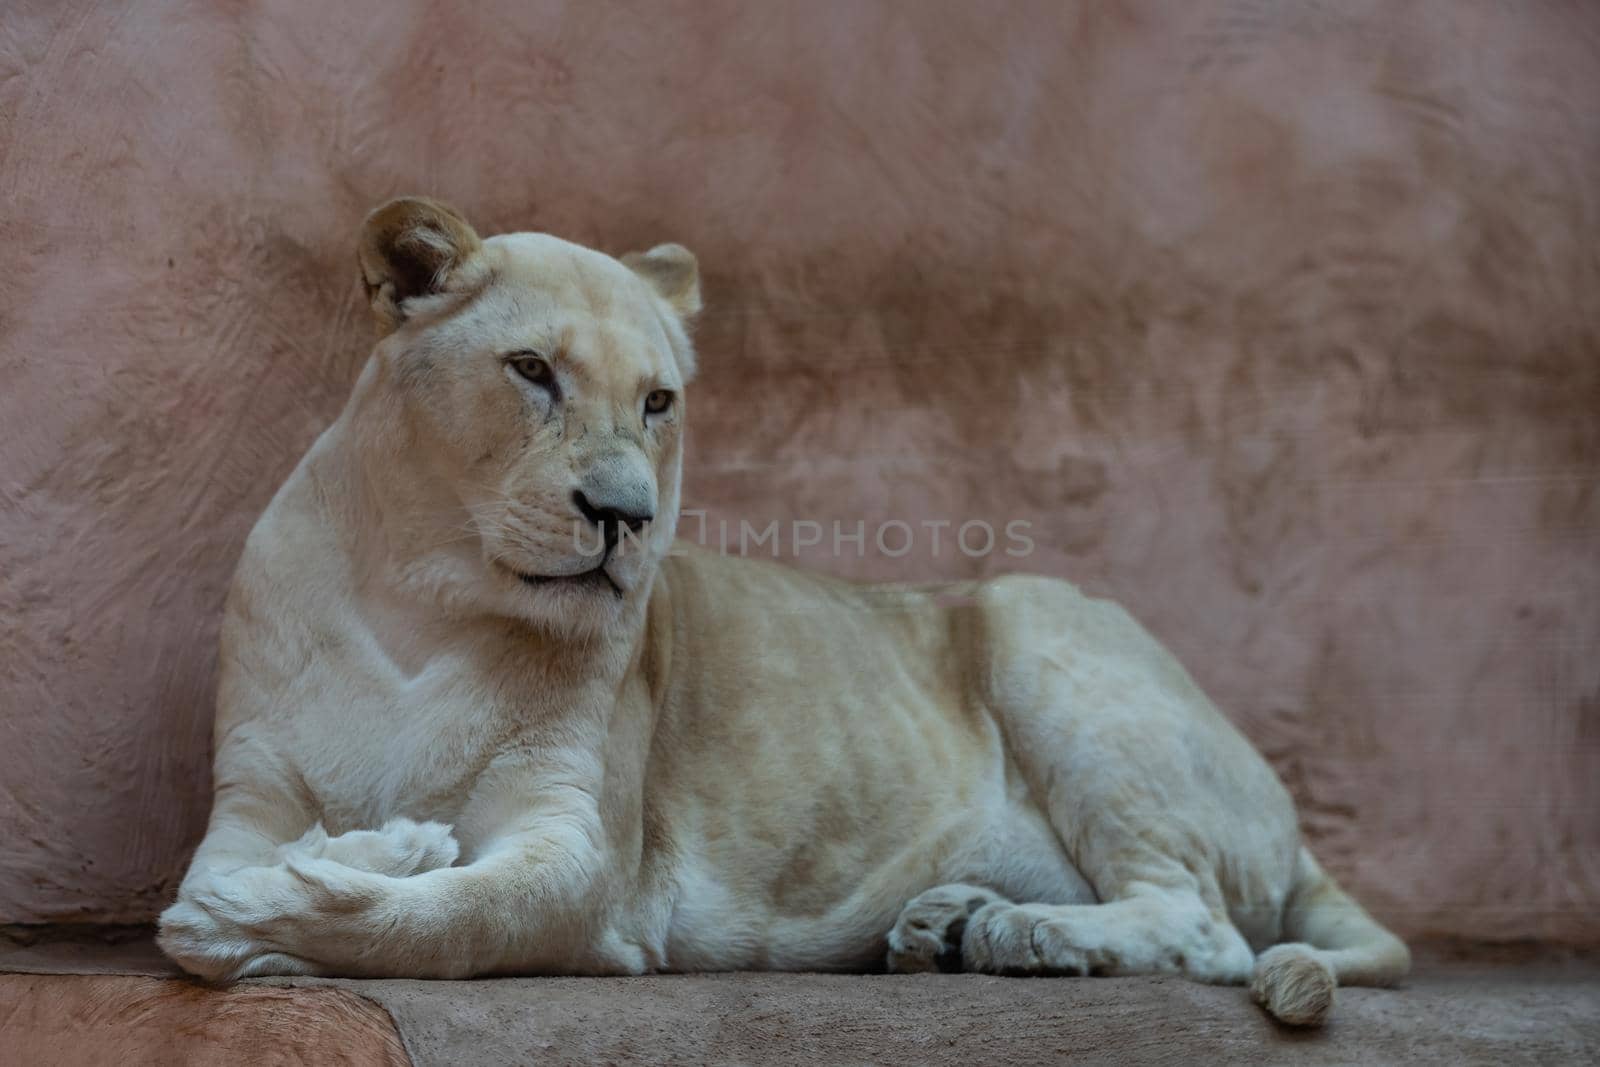 Female lion, Panthera leo, lionesse portrait, head profile on soft background, looking to the left, with space for text on left side